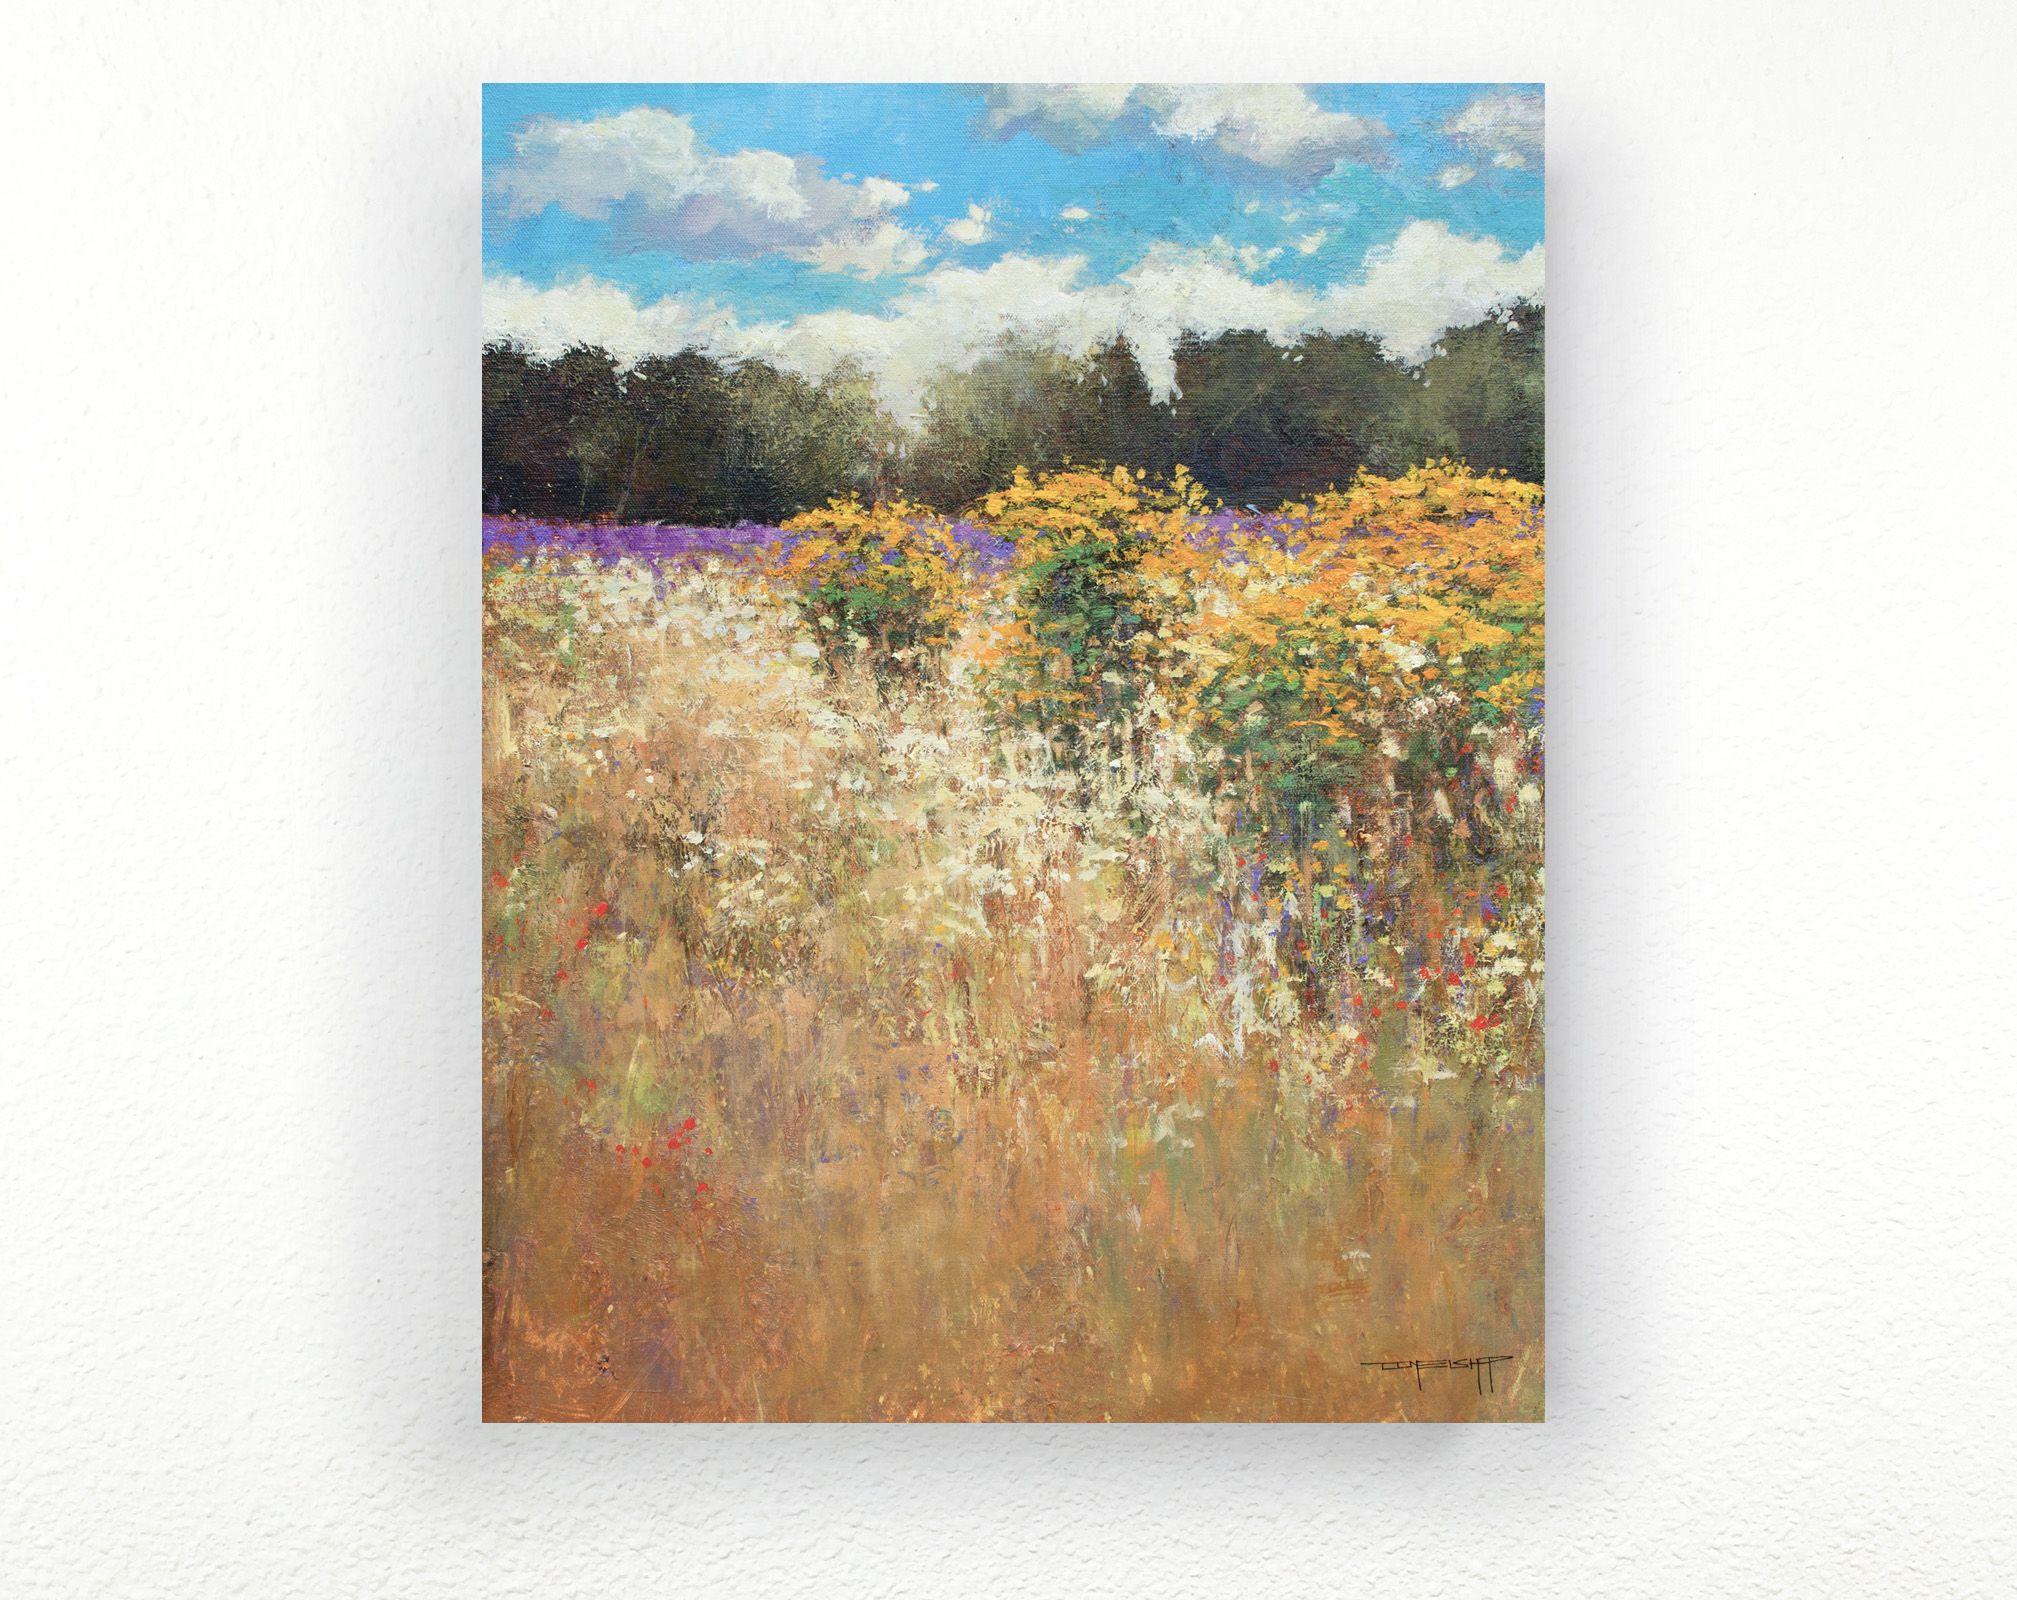 Gold And Lavender 190628  Acrylics on canvas 18x24 inches  Ready to hang, gallery wrapped canvas.    Gold And Lavender 190628 is a bright colorful impressionist landscape painting.    Painted in acrylics, this impasto painting is 18x24 inches with